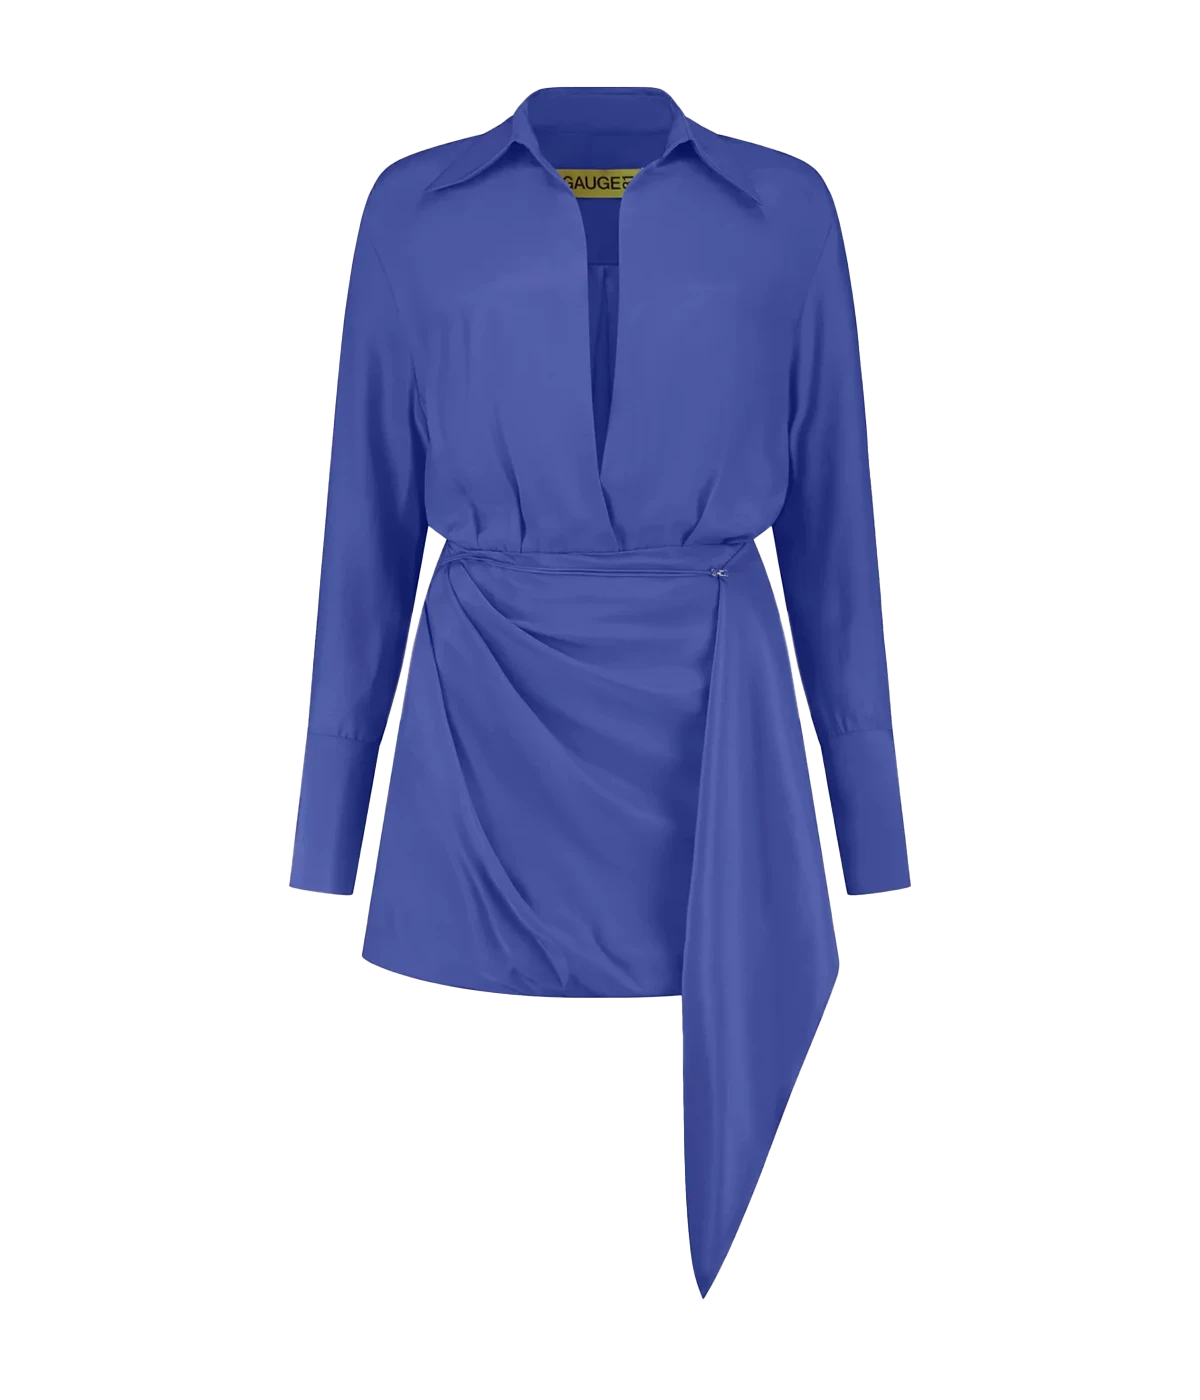  A sexy and sophisticated date night dress made form 100% silk featuring a purple colourway, shirt dress style, long sleeves, wrap front detail, open deep v neckline, panel hooked over front and wrap detail. 100% silk, made in Amsterdam, date night dress, bra friendly, comfortable.   